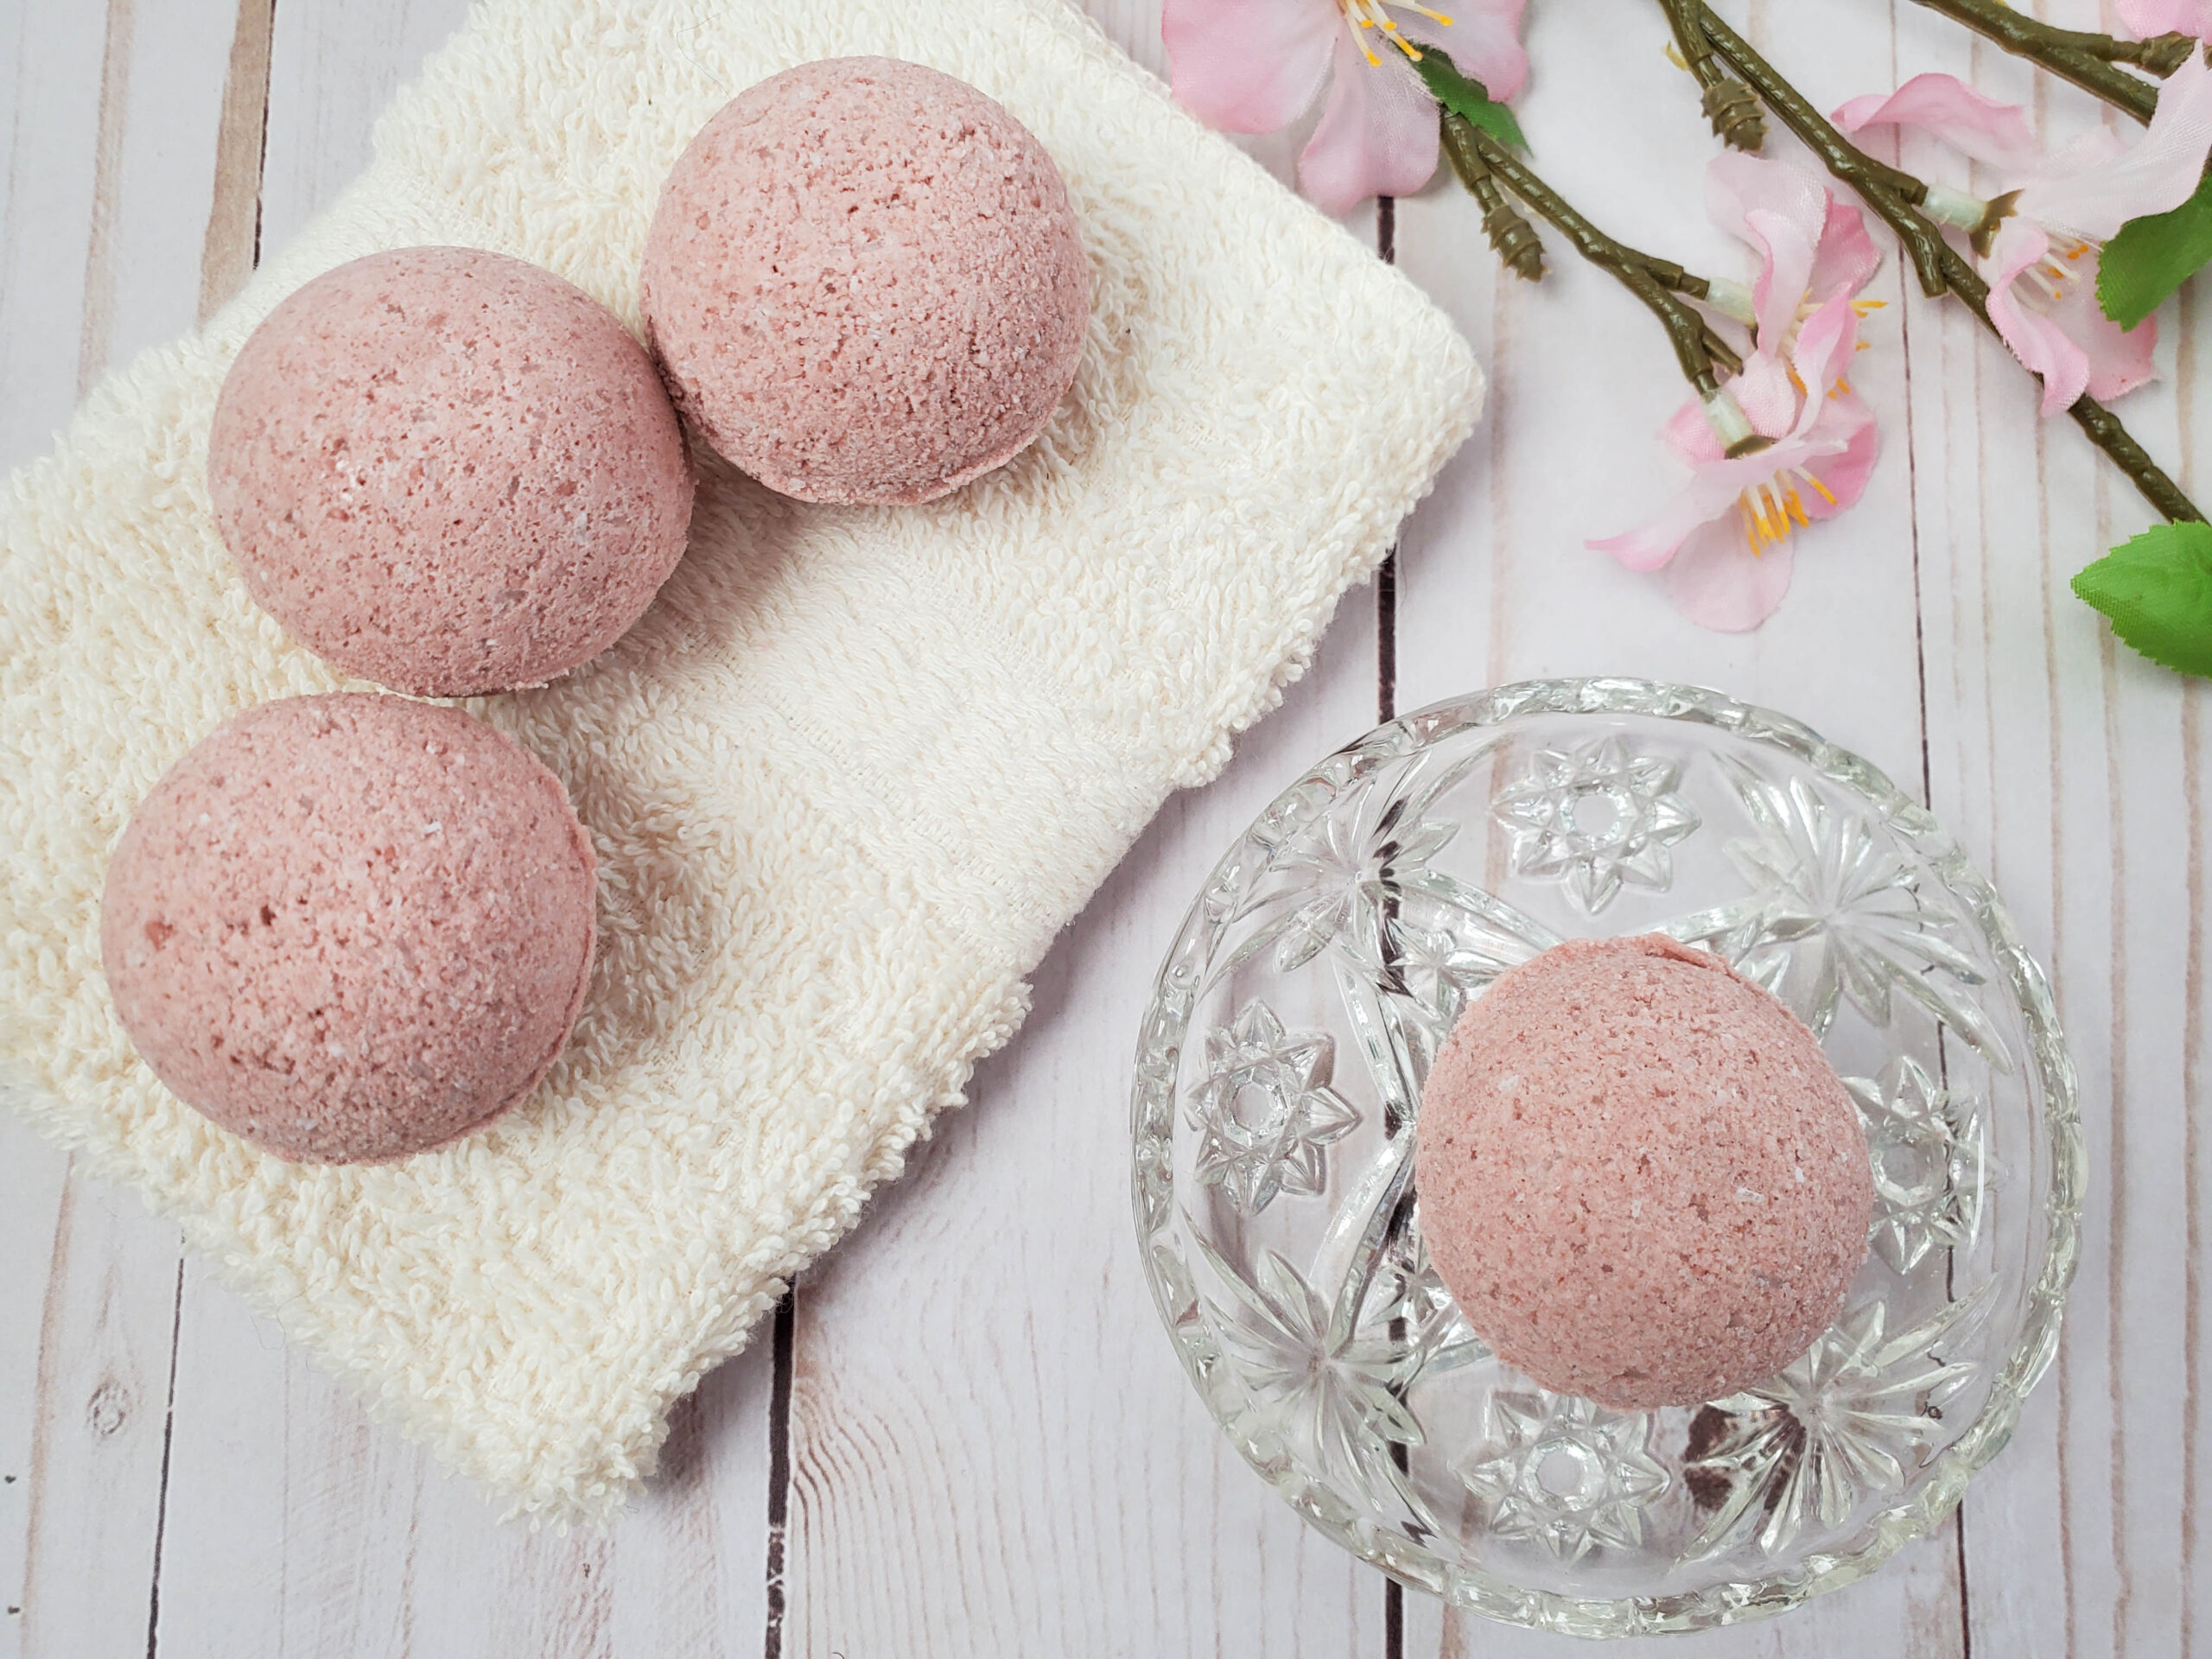 Sweet Almond Oil Bath Bombs are easy to make and smells phenomenal.